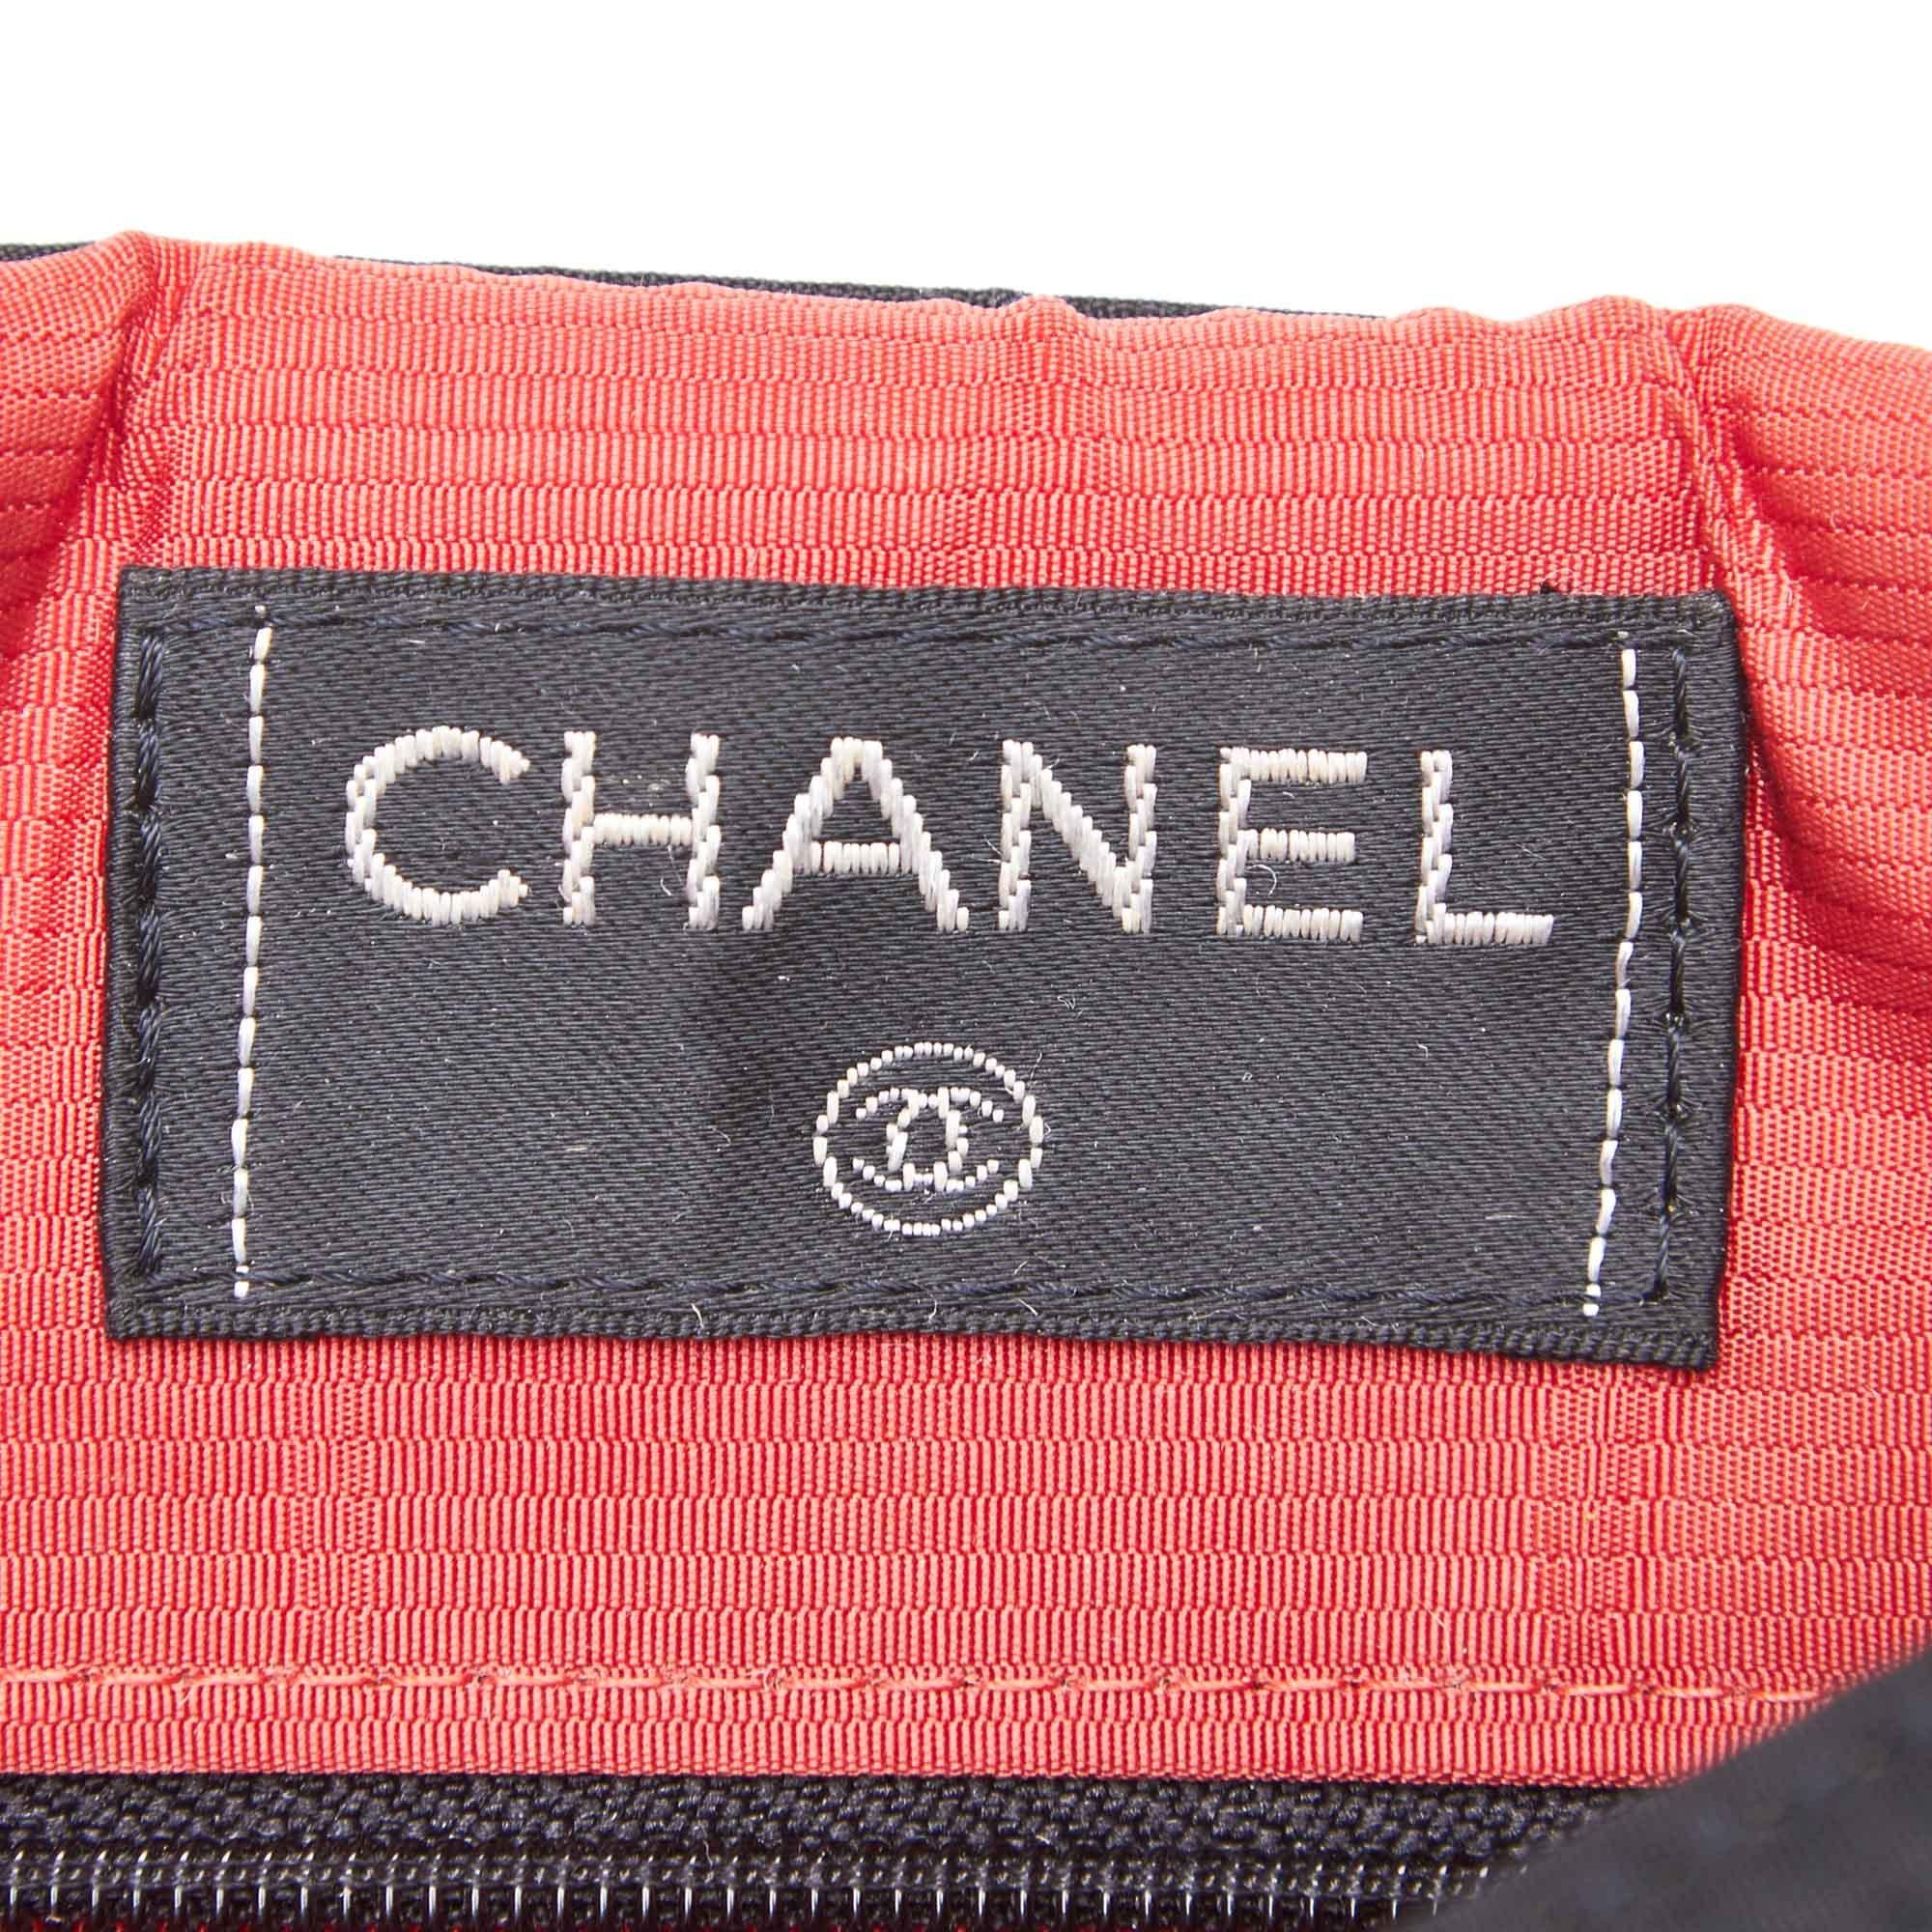 Vintage Authentic Chanel Black Nylon Fabric Old Travel Backpack France MEDIUM  For Sale 2